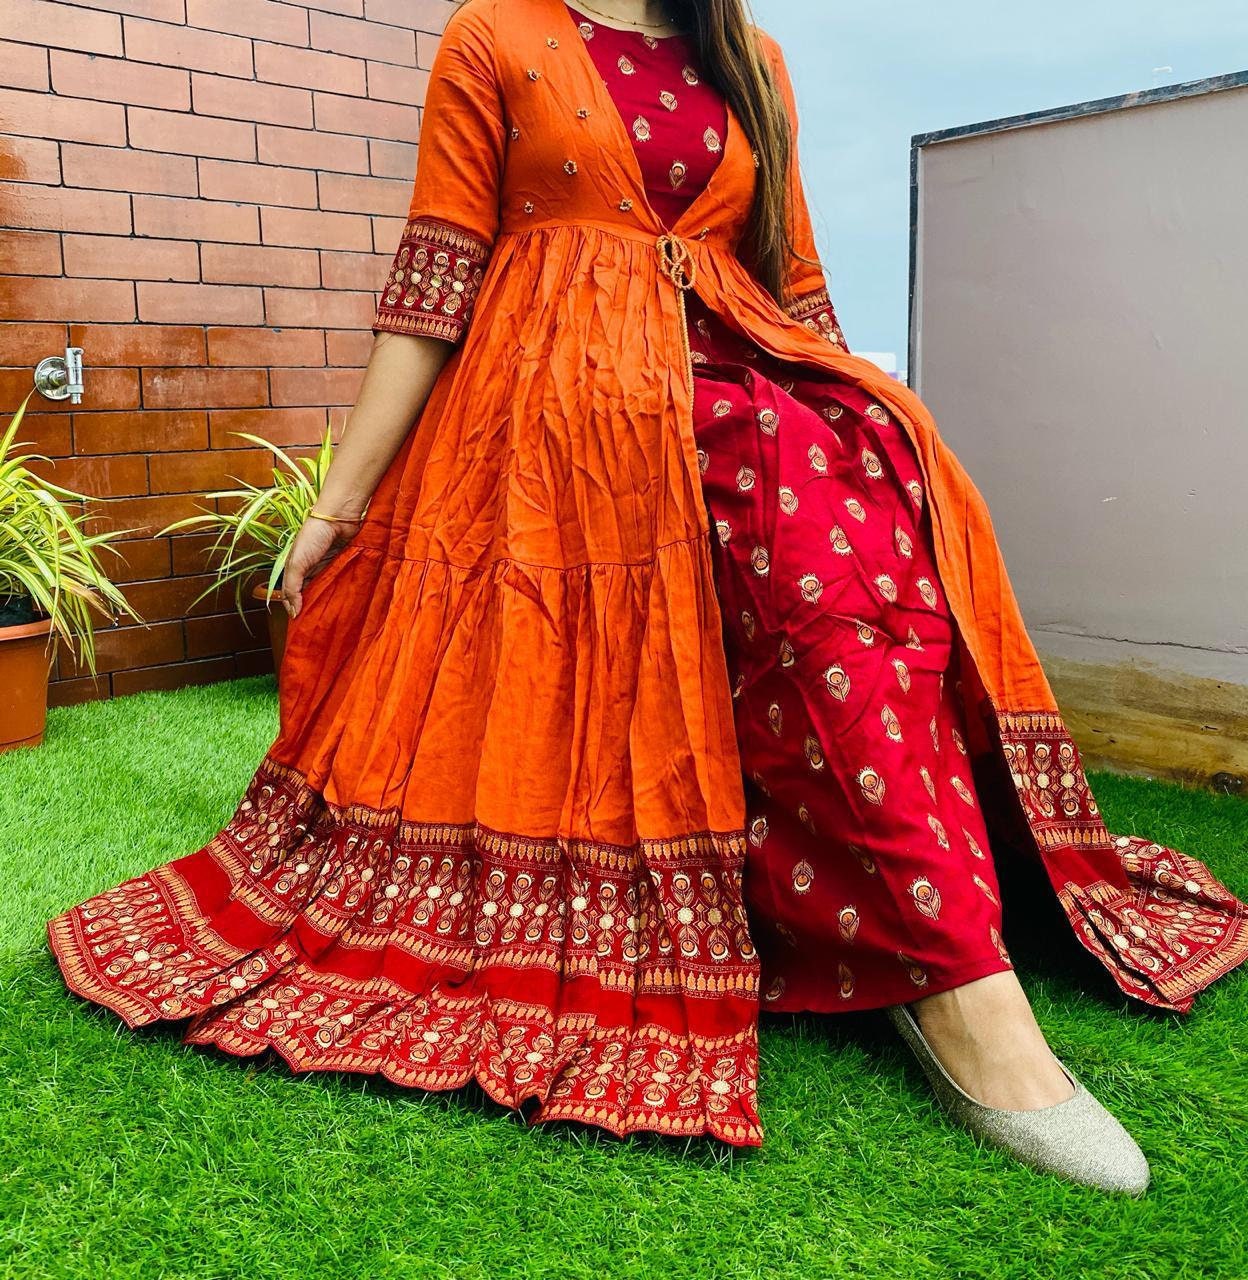 Kurti Frocks are Ruling This Season and Heres Why You Need to Get in on  This Trend  10 Must Have Anarkali Suits and Kurti Frocks for 2020